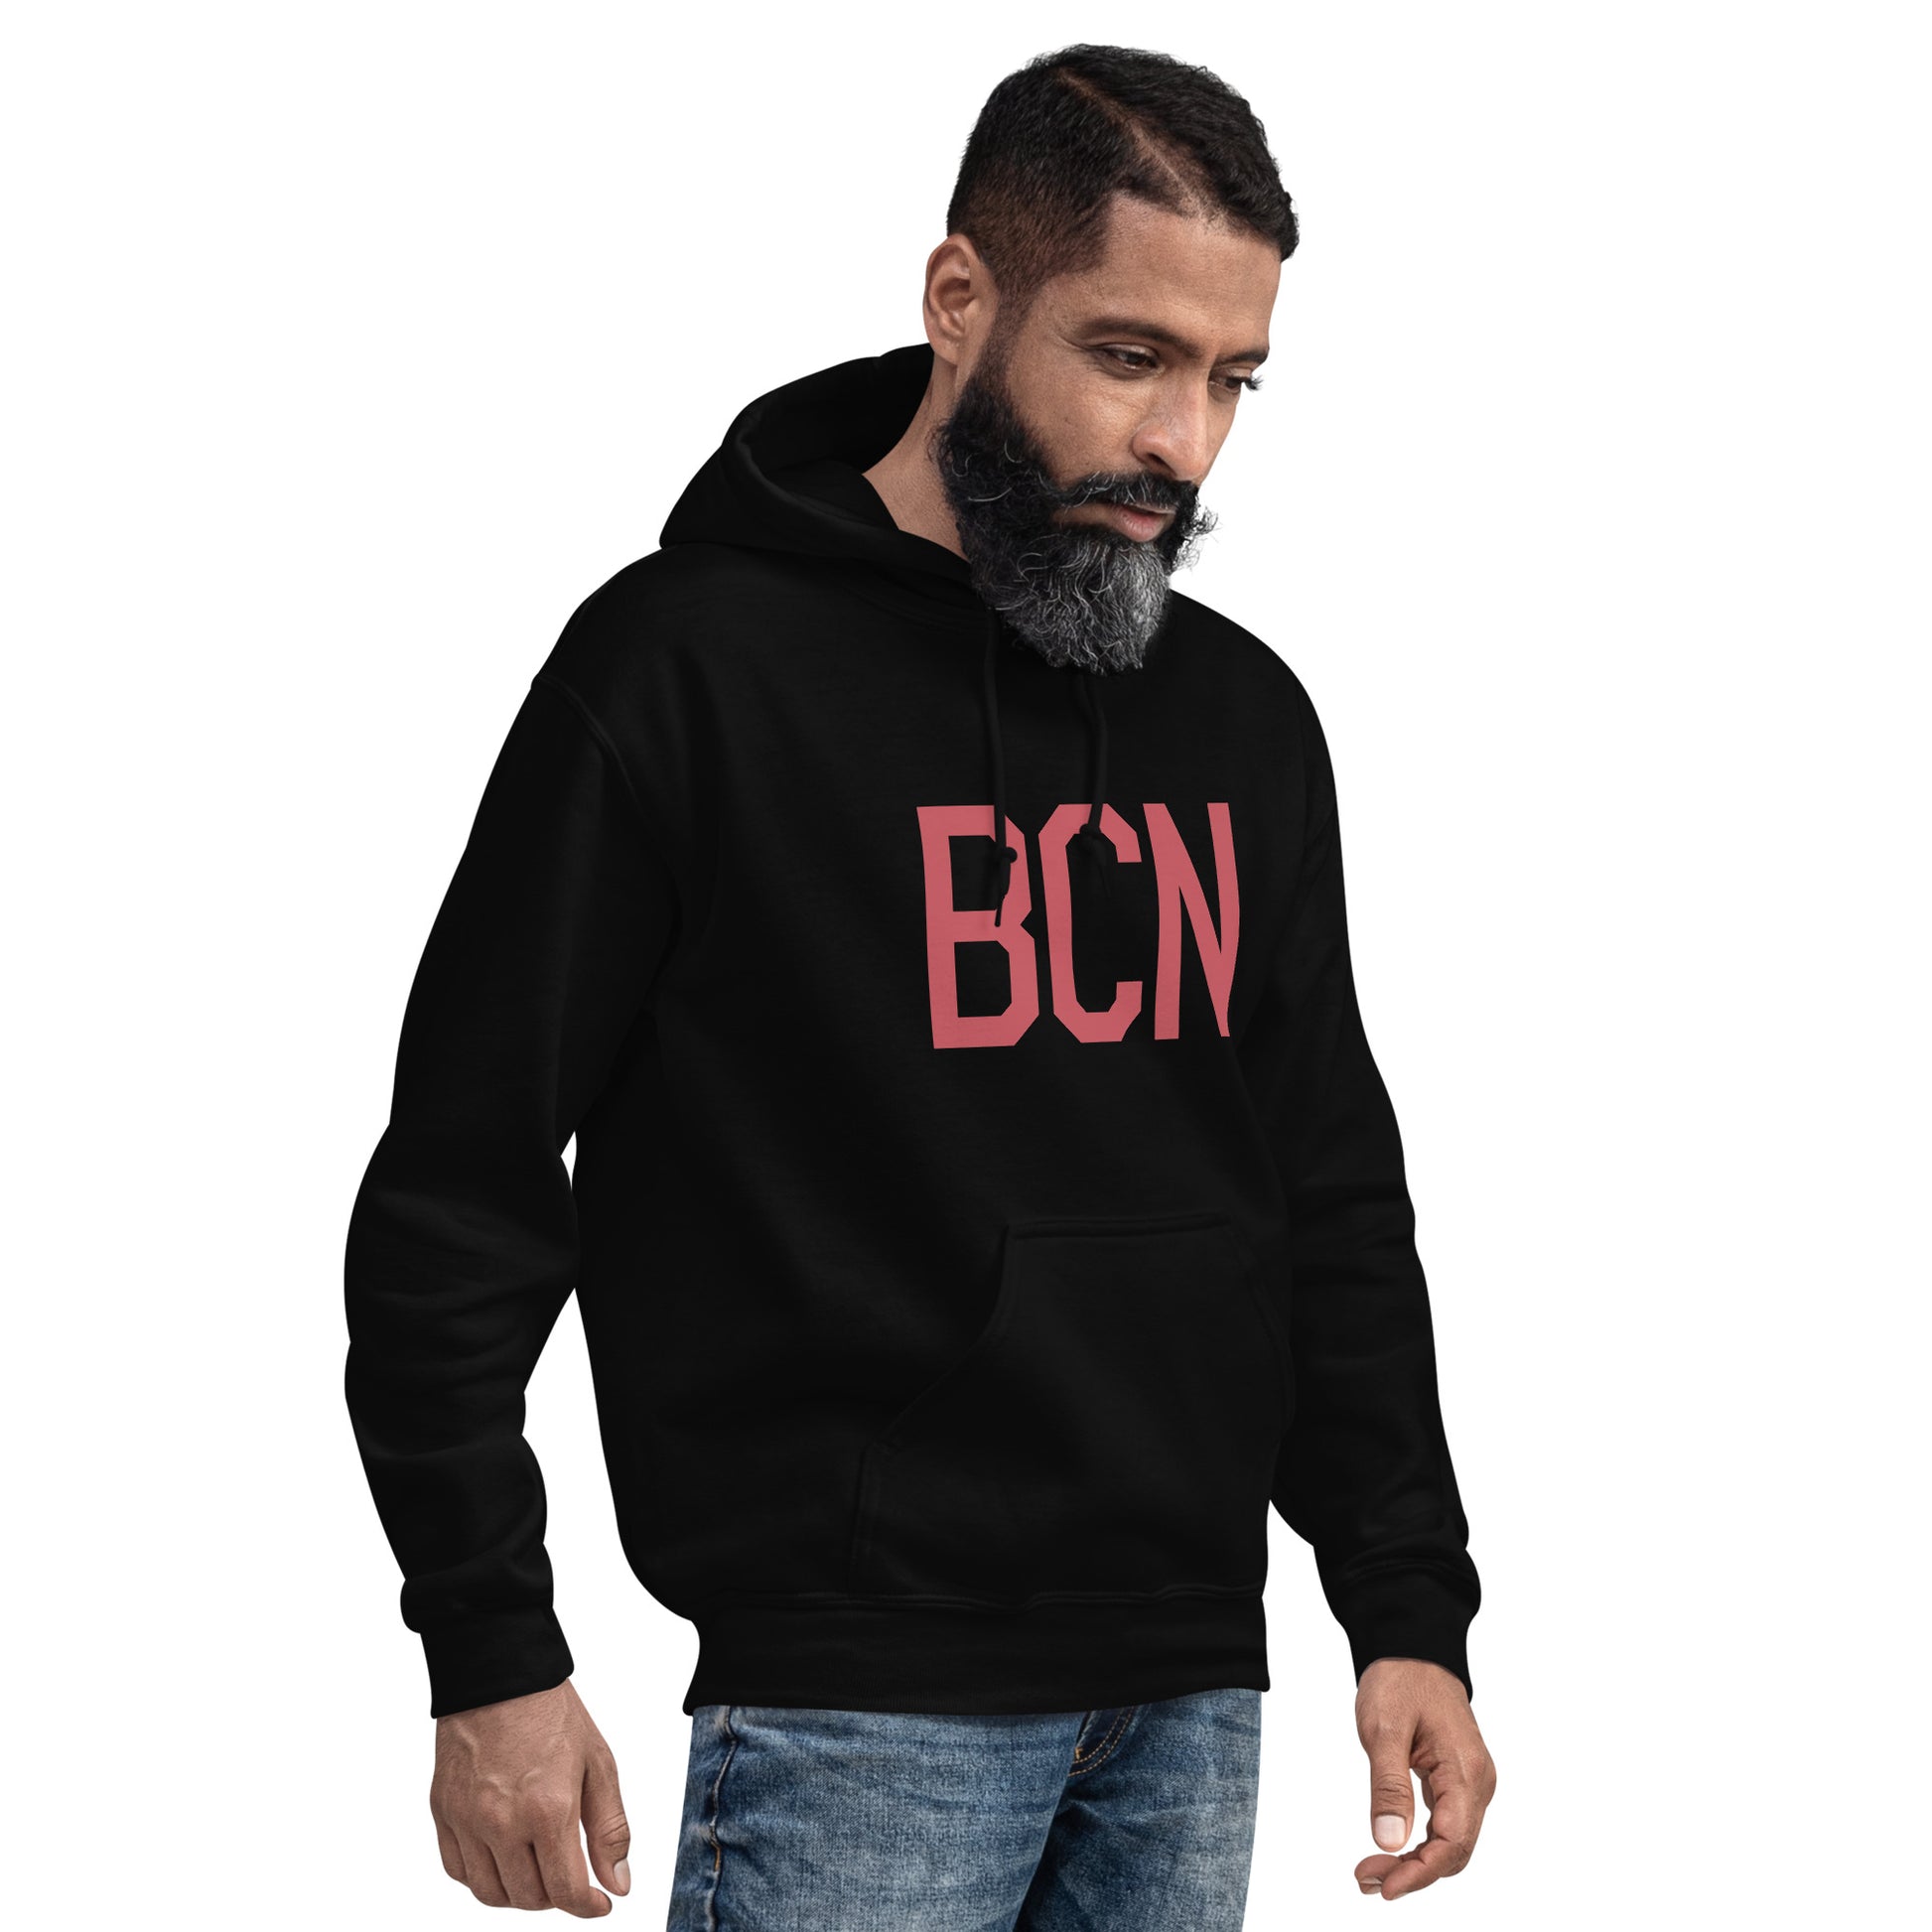 Aviation Enthusiast Hoodie - Deep Pink Graphic • BCN Barcelona • YHM Designs - Image 06